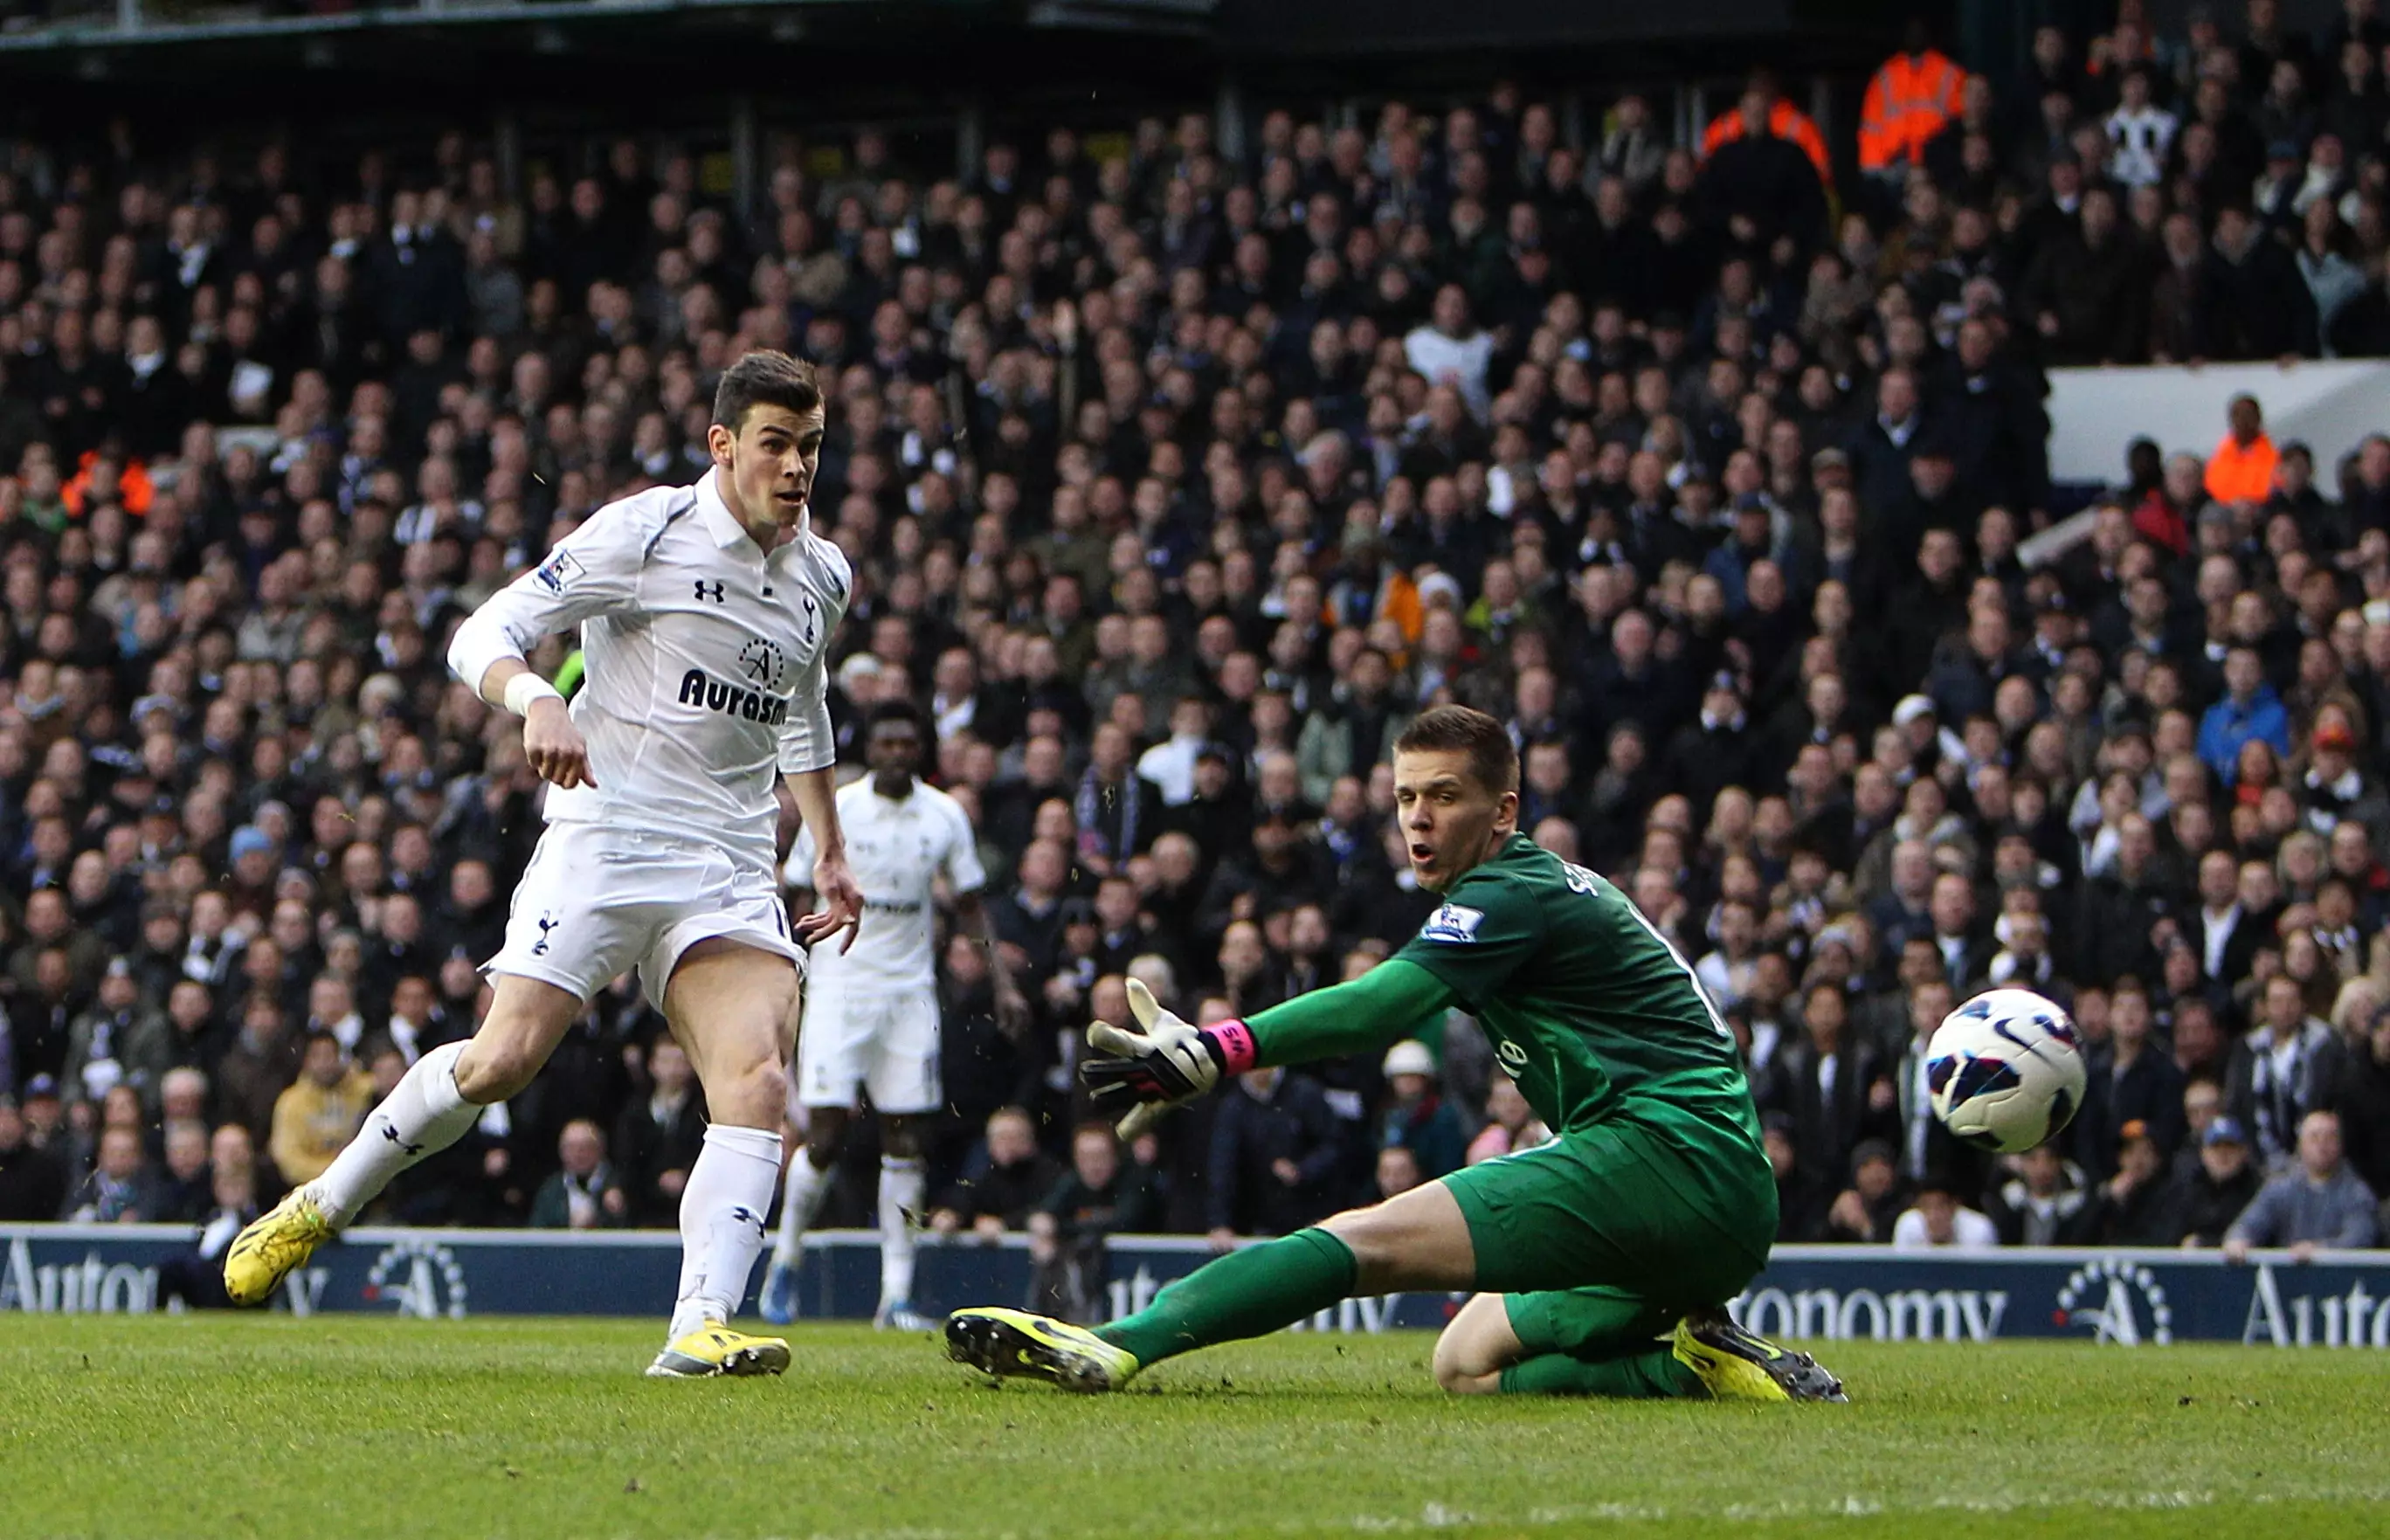 Bale was incredible for Spurs in his last season in the Premier League. Image: PA Images